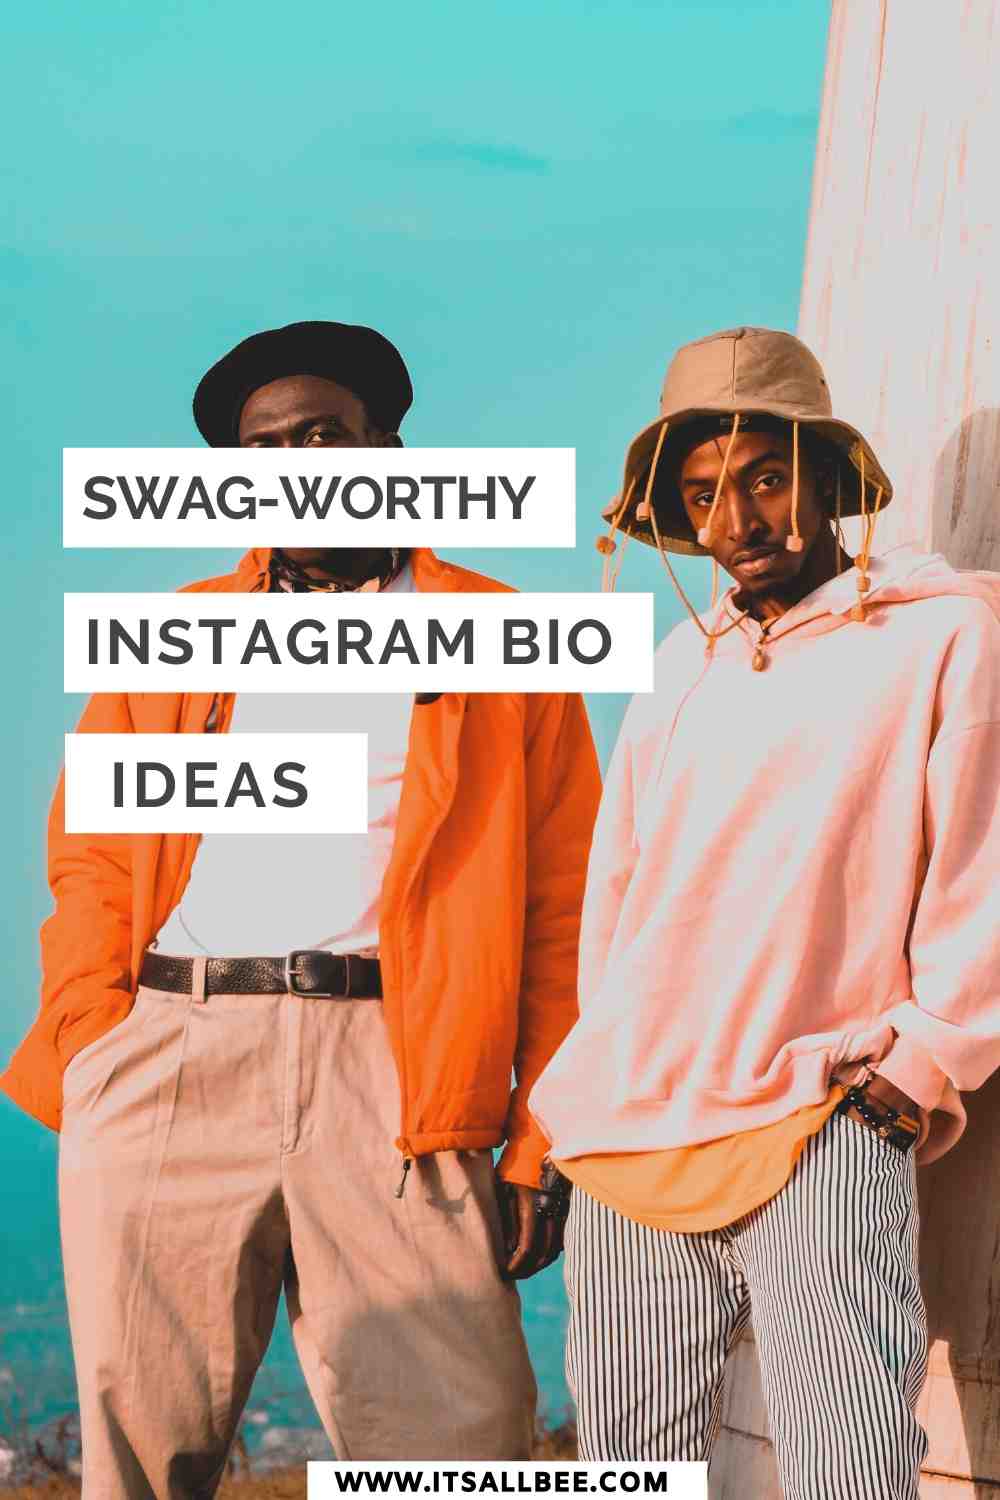 150 Quotes Captions Ideas For Instagram Bios For Guys Itsallbee Travel Blog